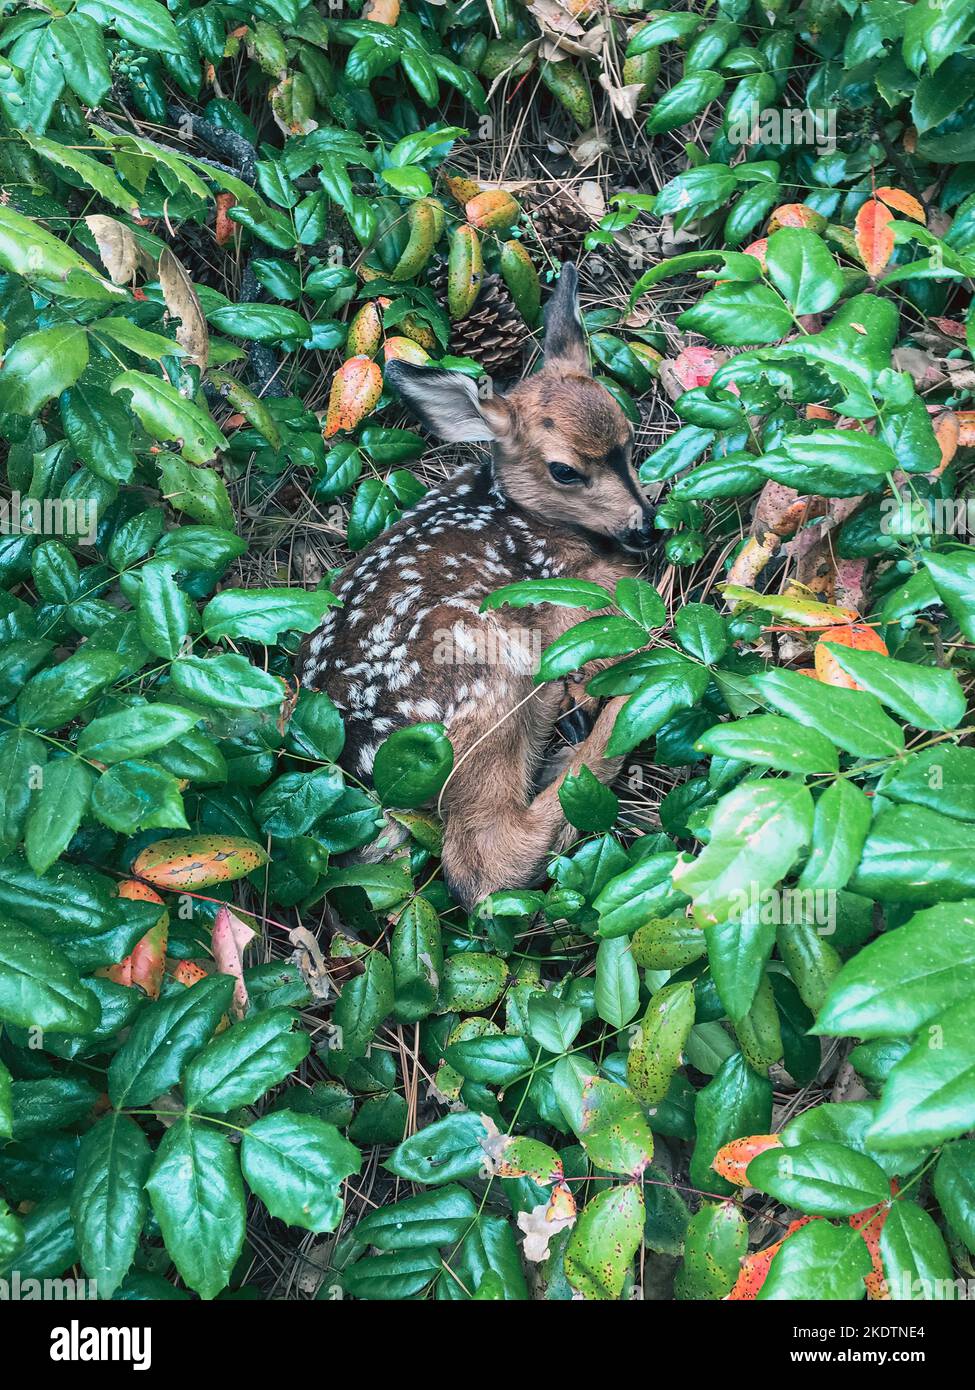 A very young fawn on its own, curled up surrounded by green shrubs, waiting for its mother Stock Photo